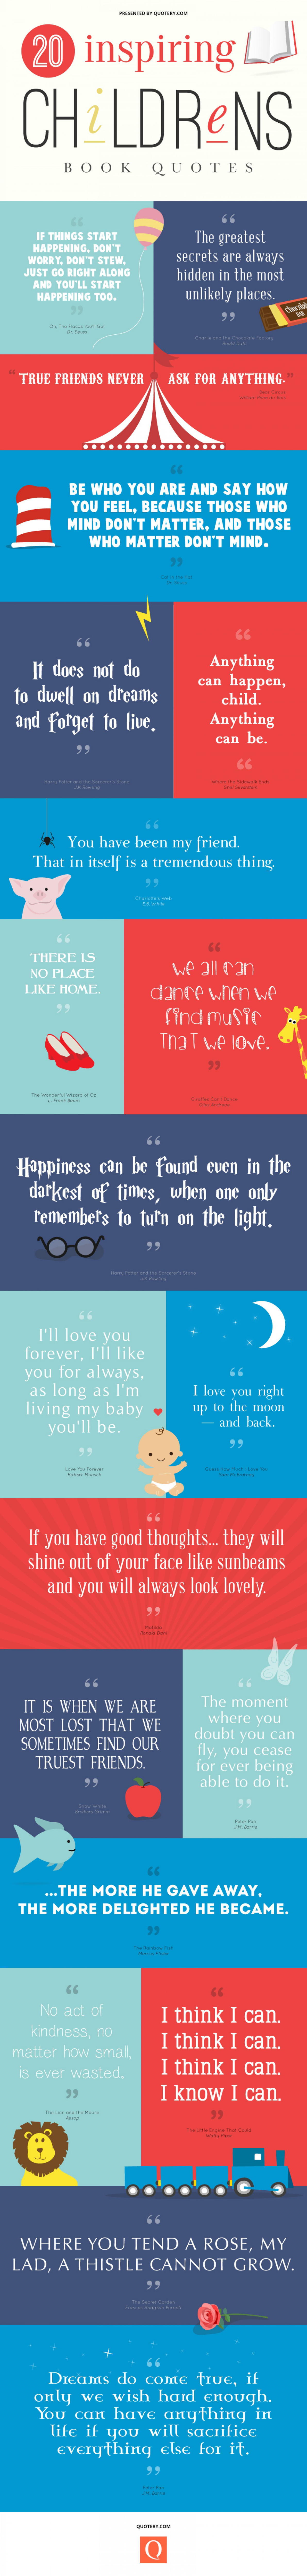 Inspirational Quotes From Children's Books - Infographics 